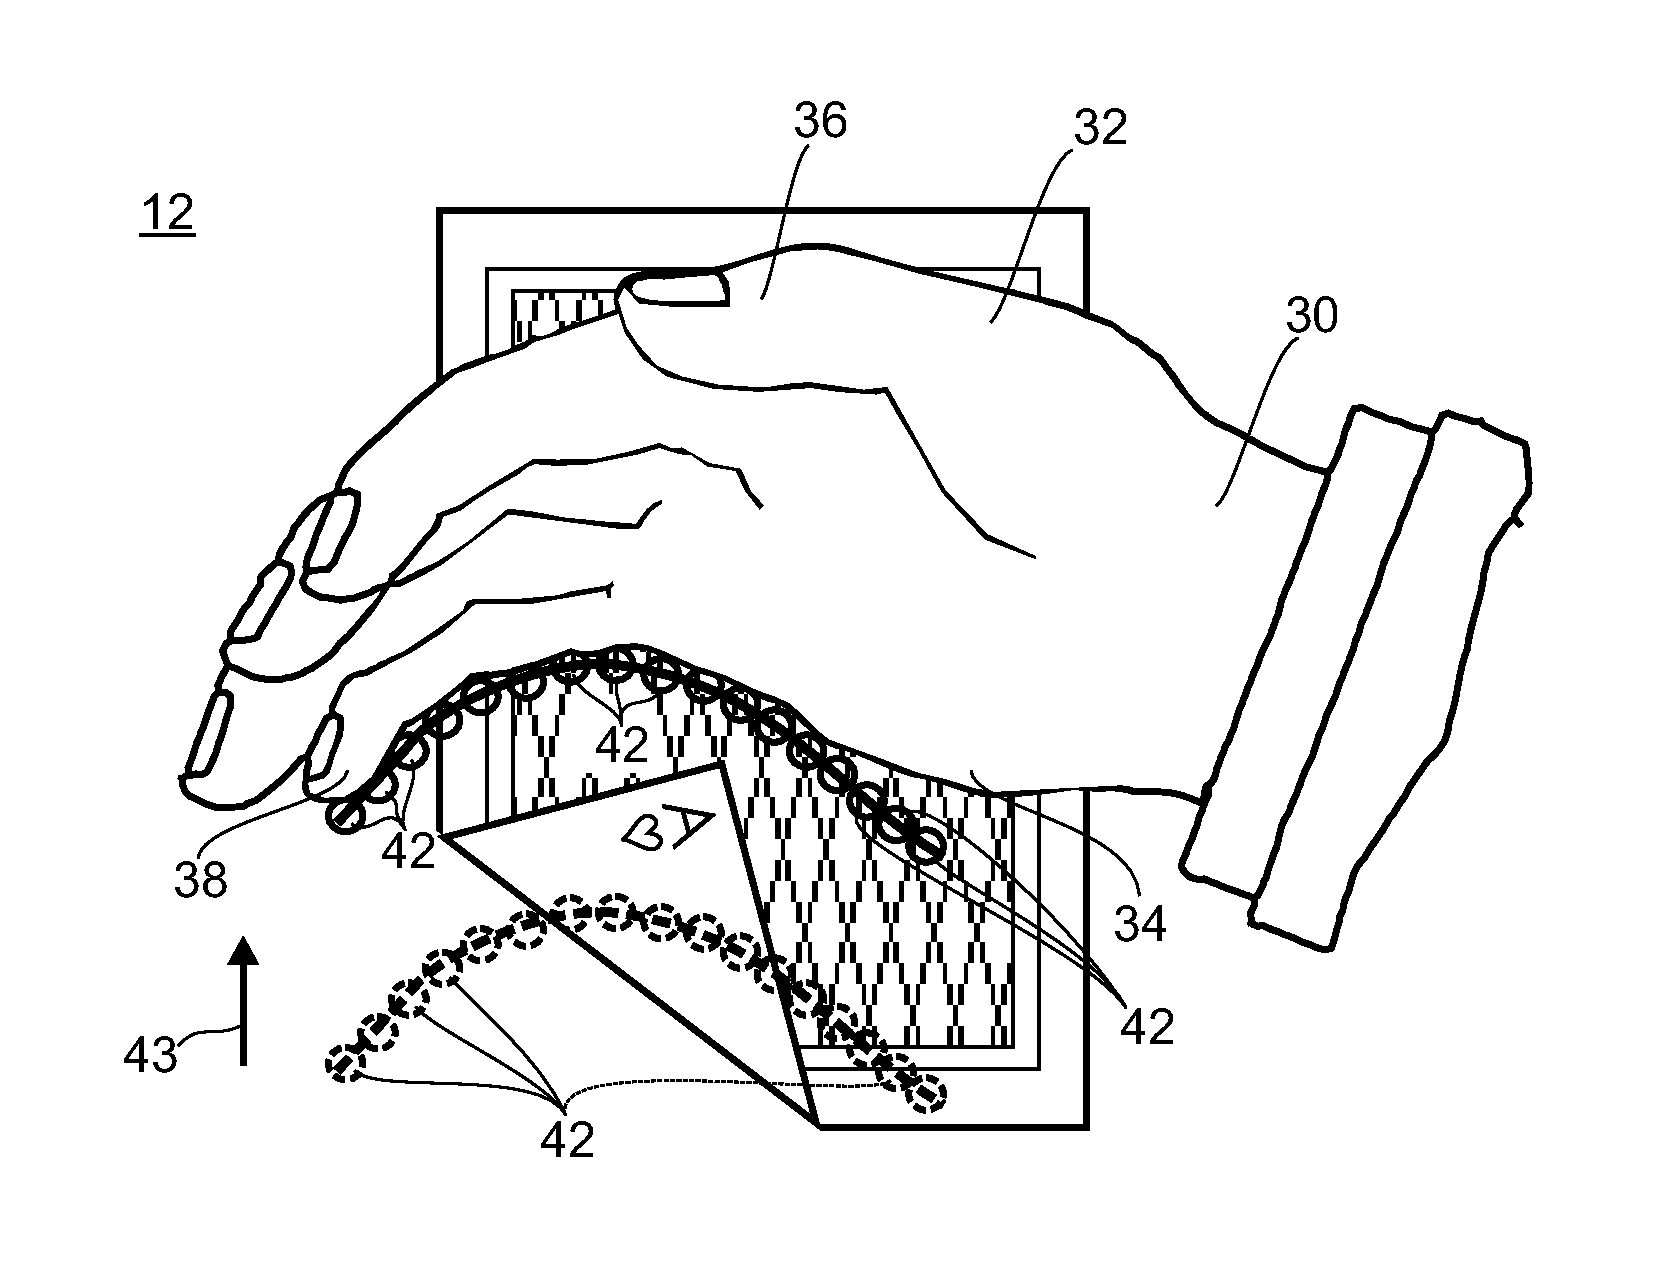 Method and system for secretly revealing items on a multi-touch interface